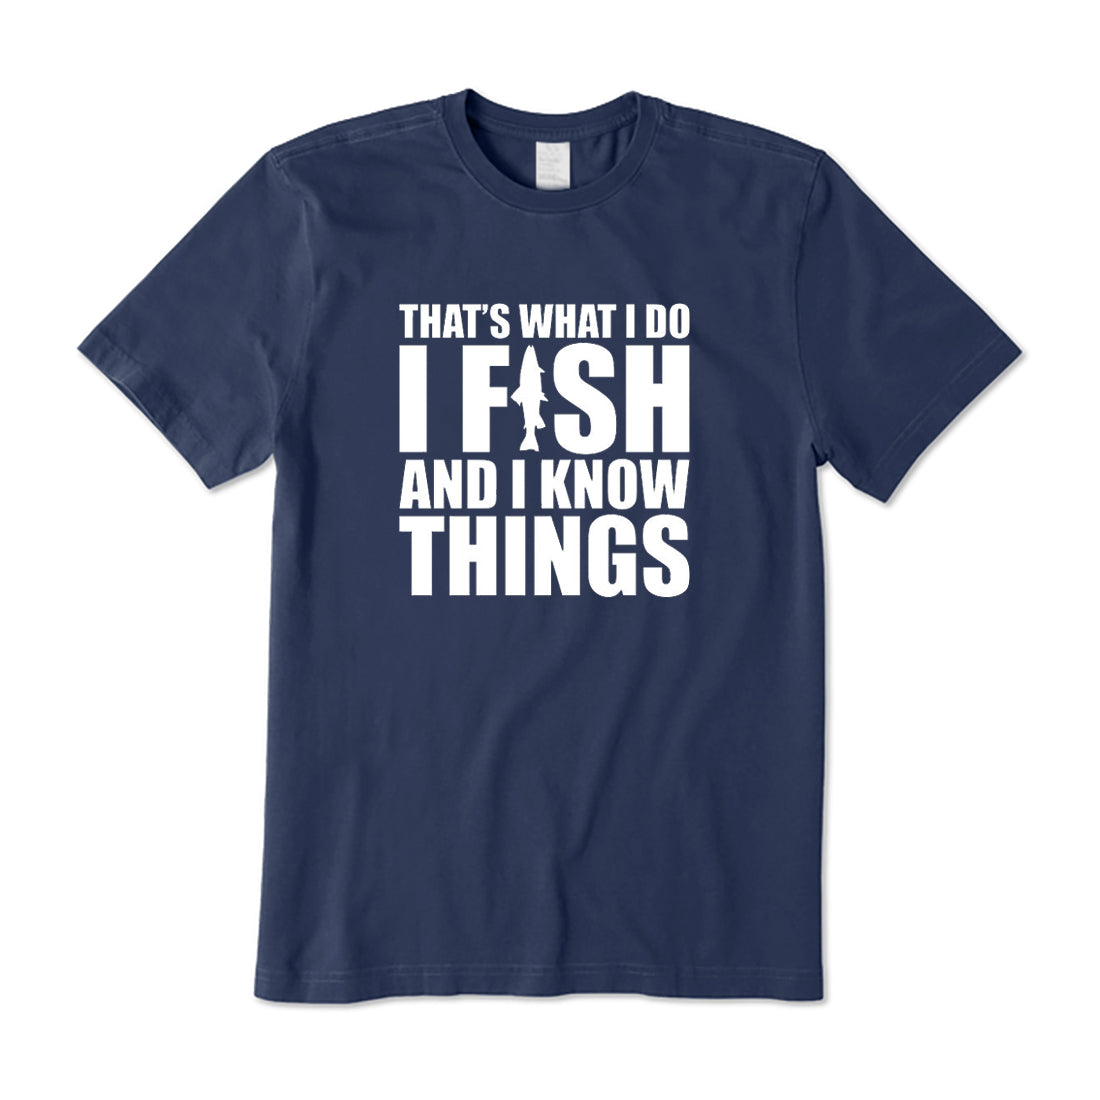 I Fish and I know Things T-Shirt